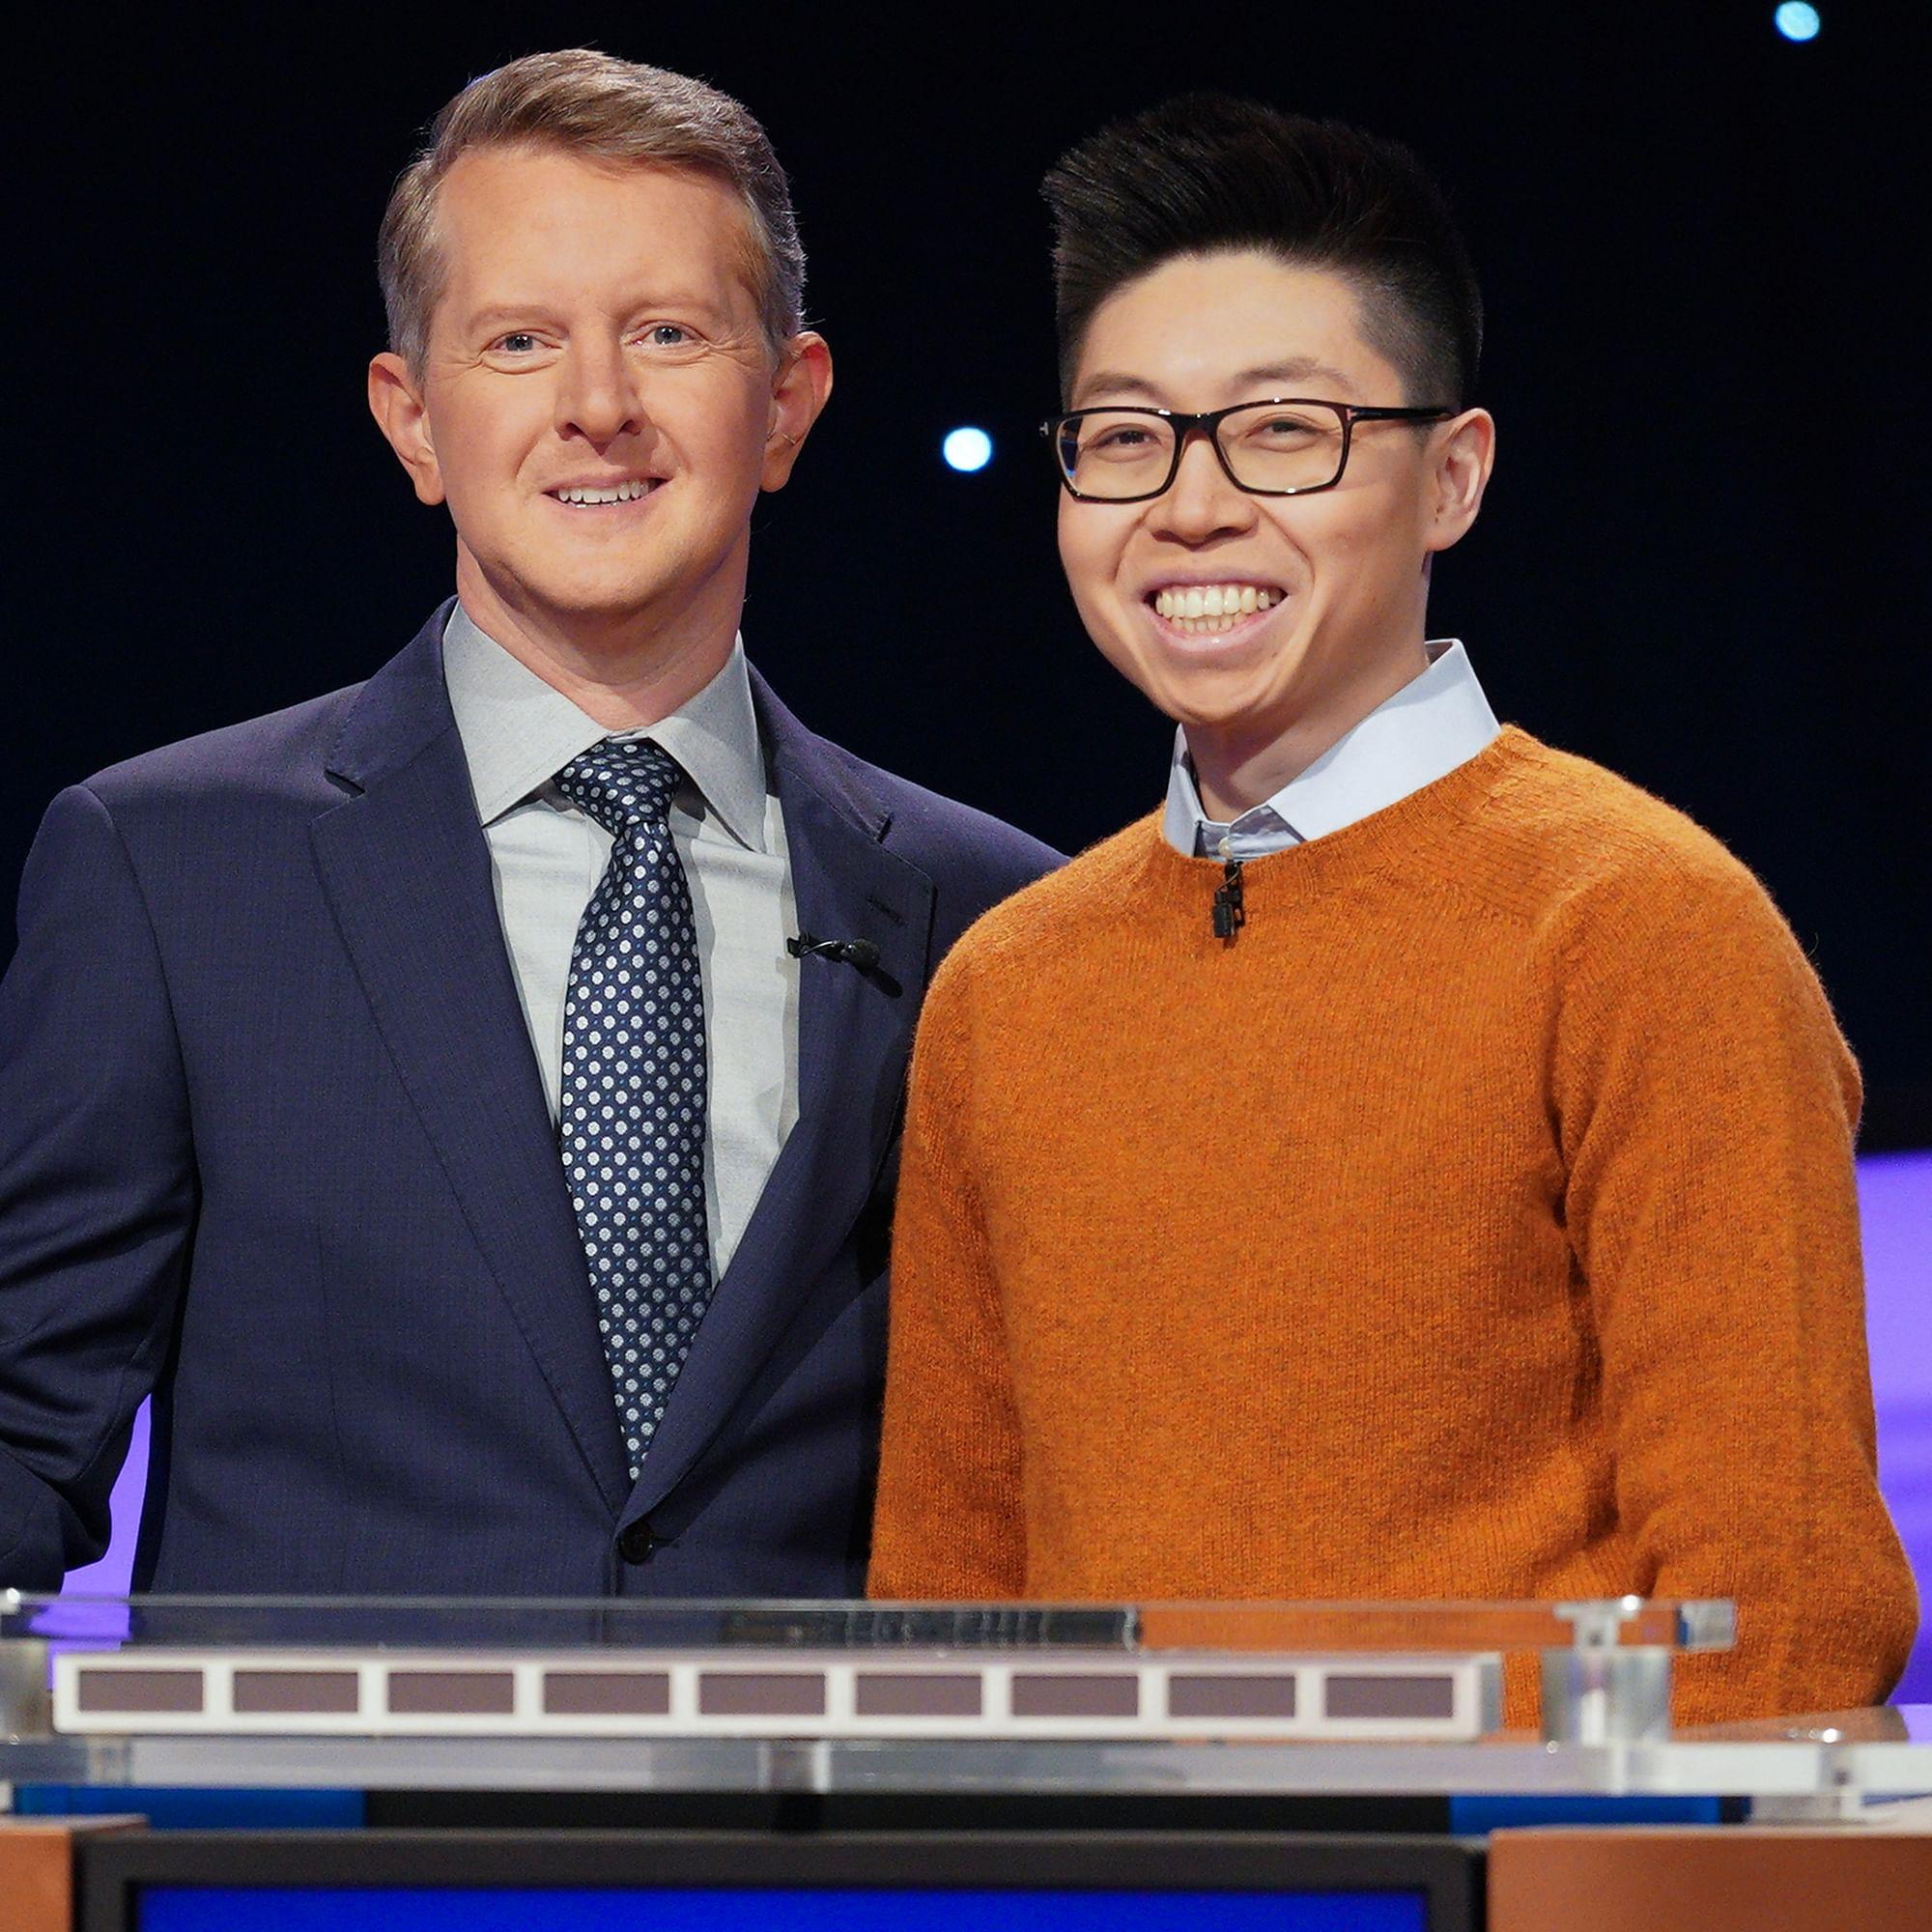 Ken Jennings poses with Andrew He